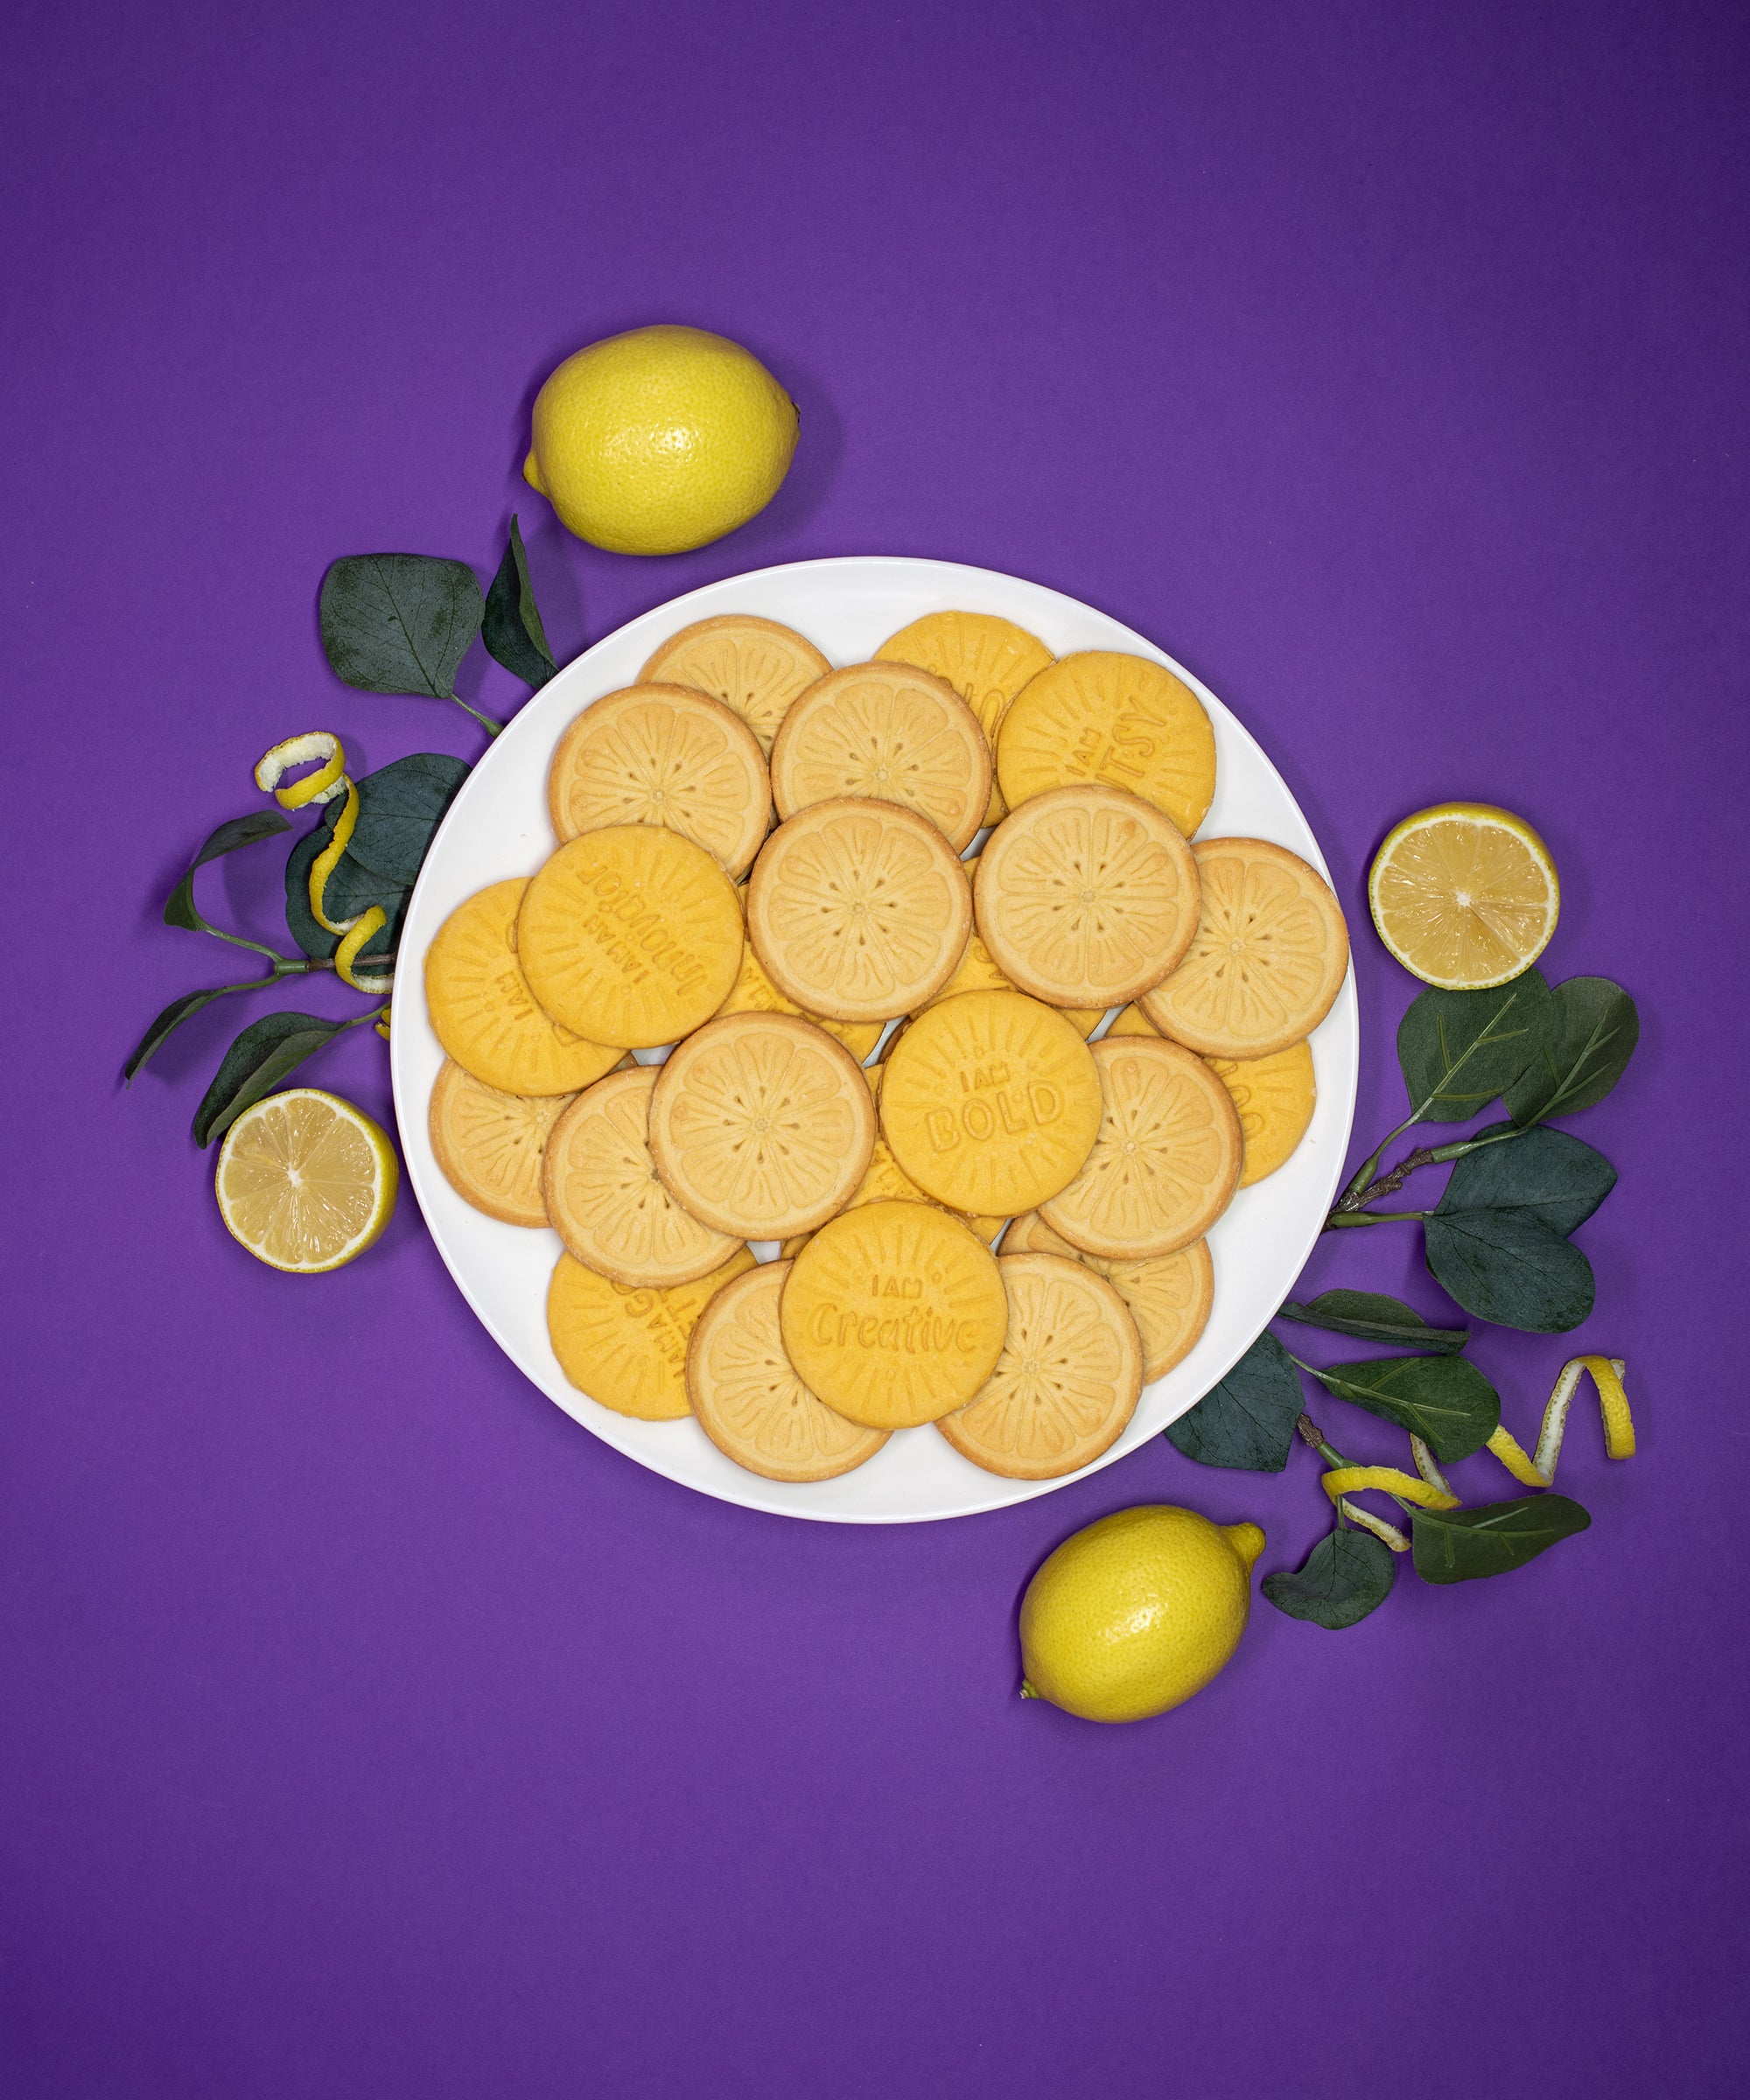 Lemon-Ups Are the Newest Girl Scout Cookie in 2020